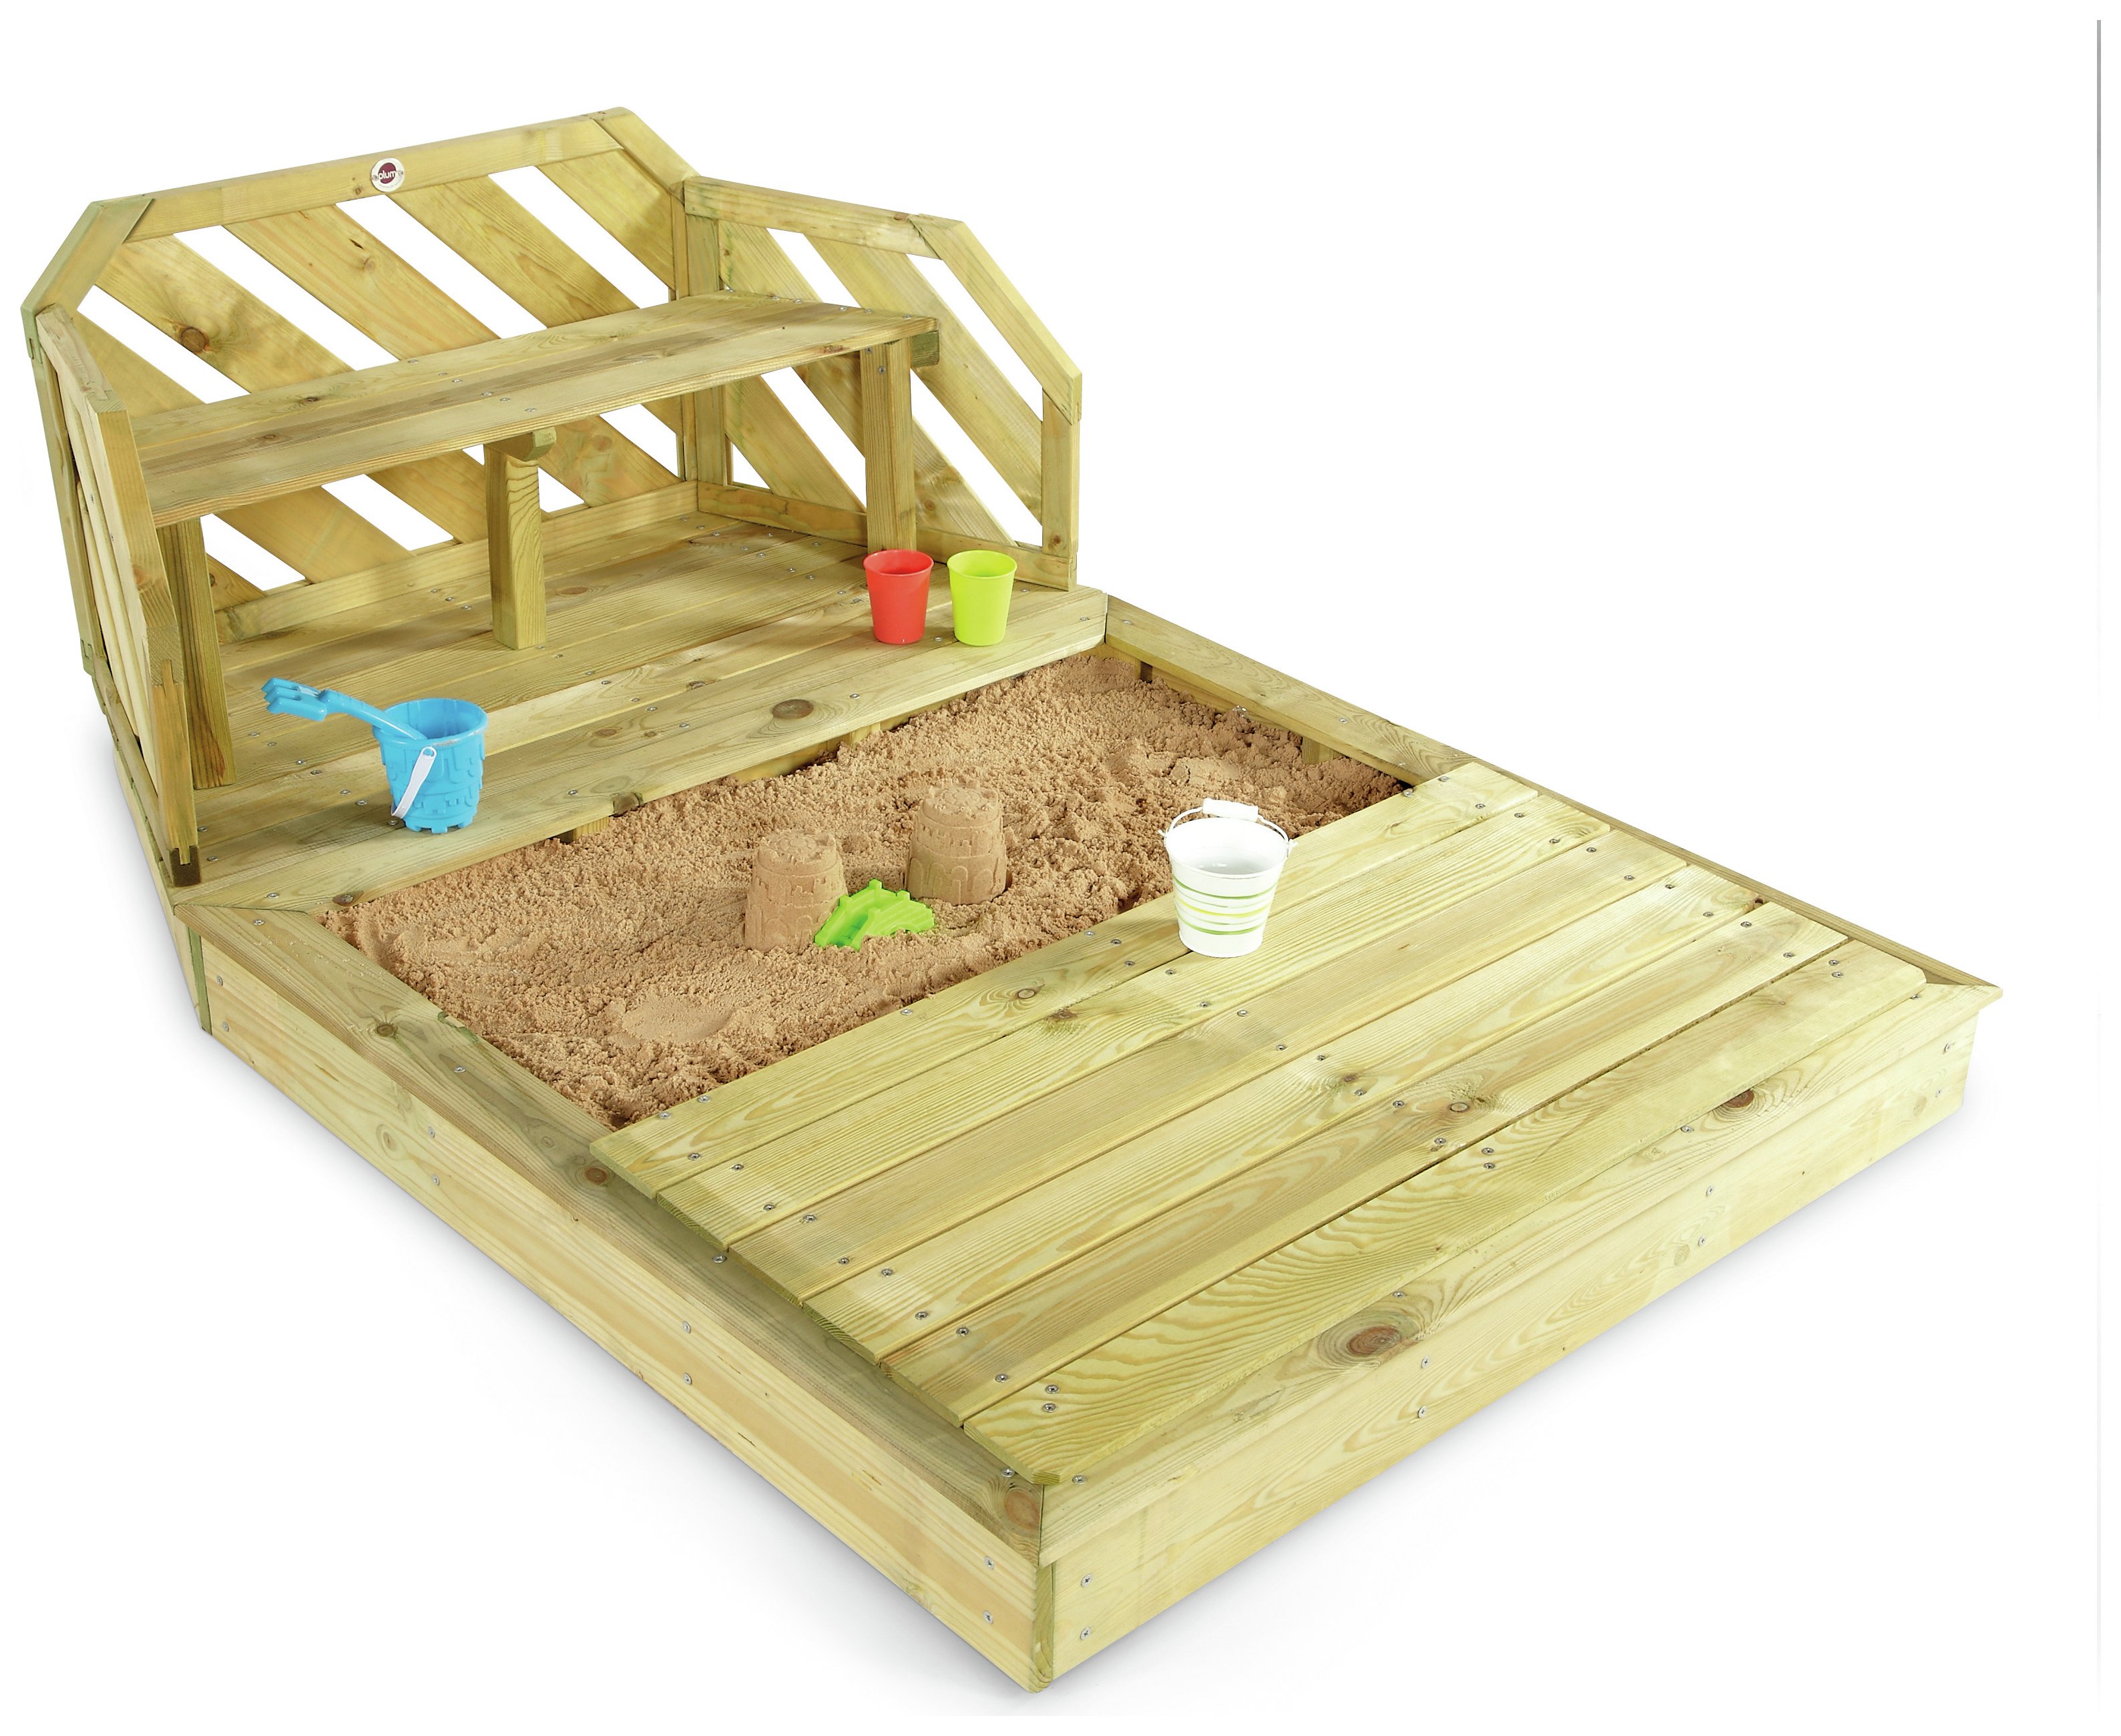 Plum Premium Wooden Sand Pit and Bench.